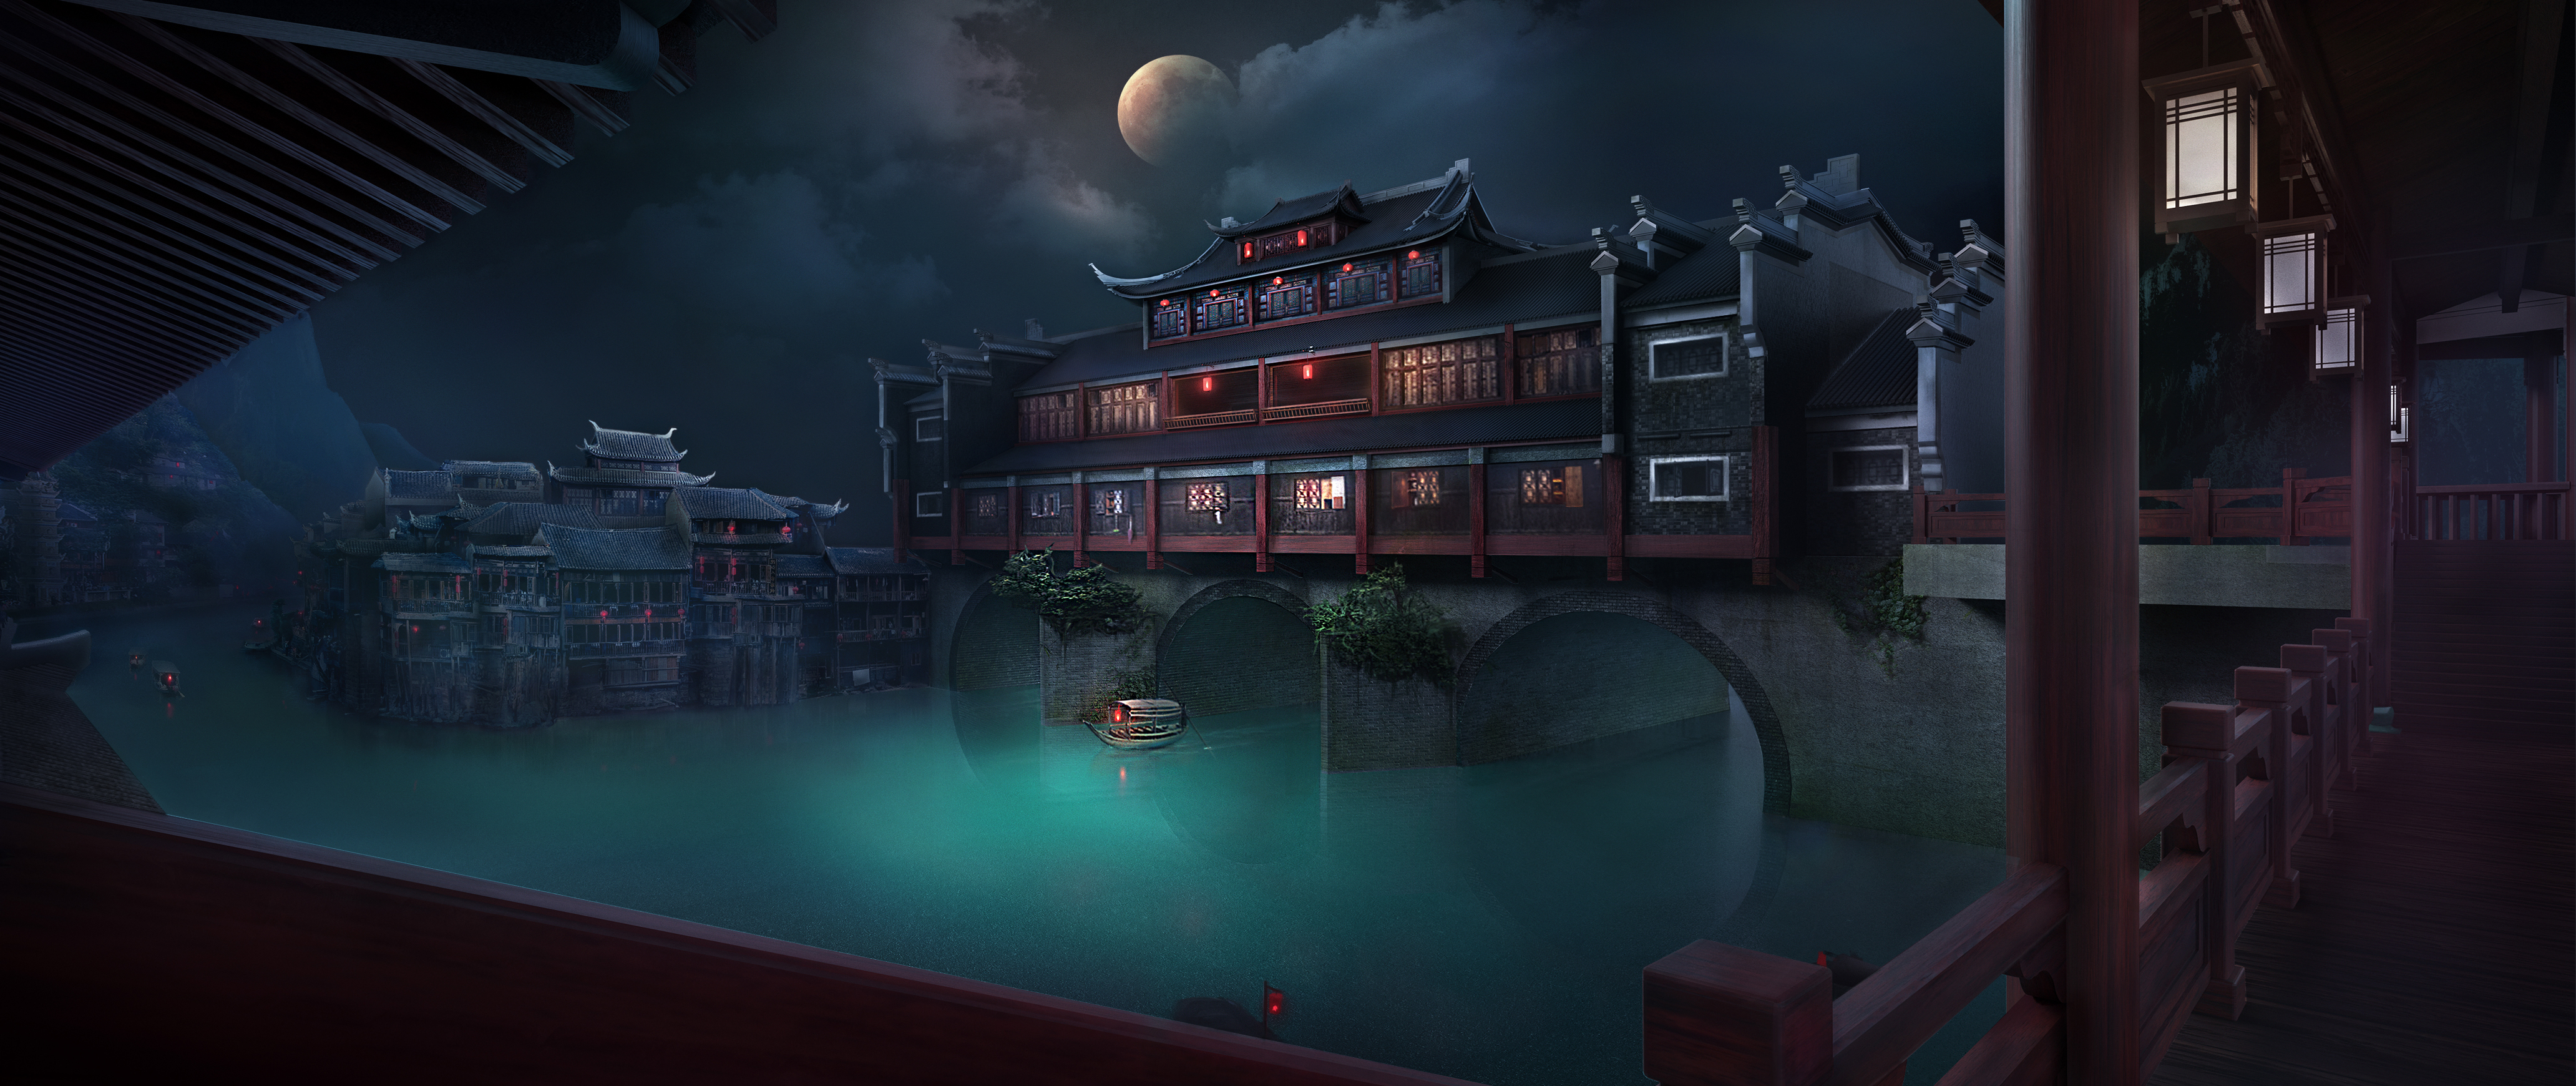 Ferry Water Moon Phases Asian Architecture Night 4128x1740